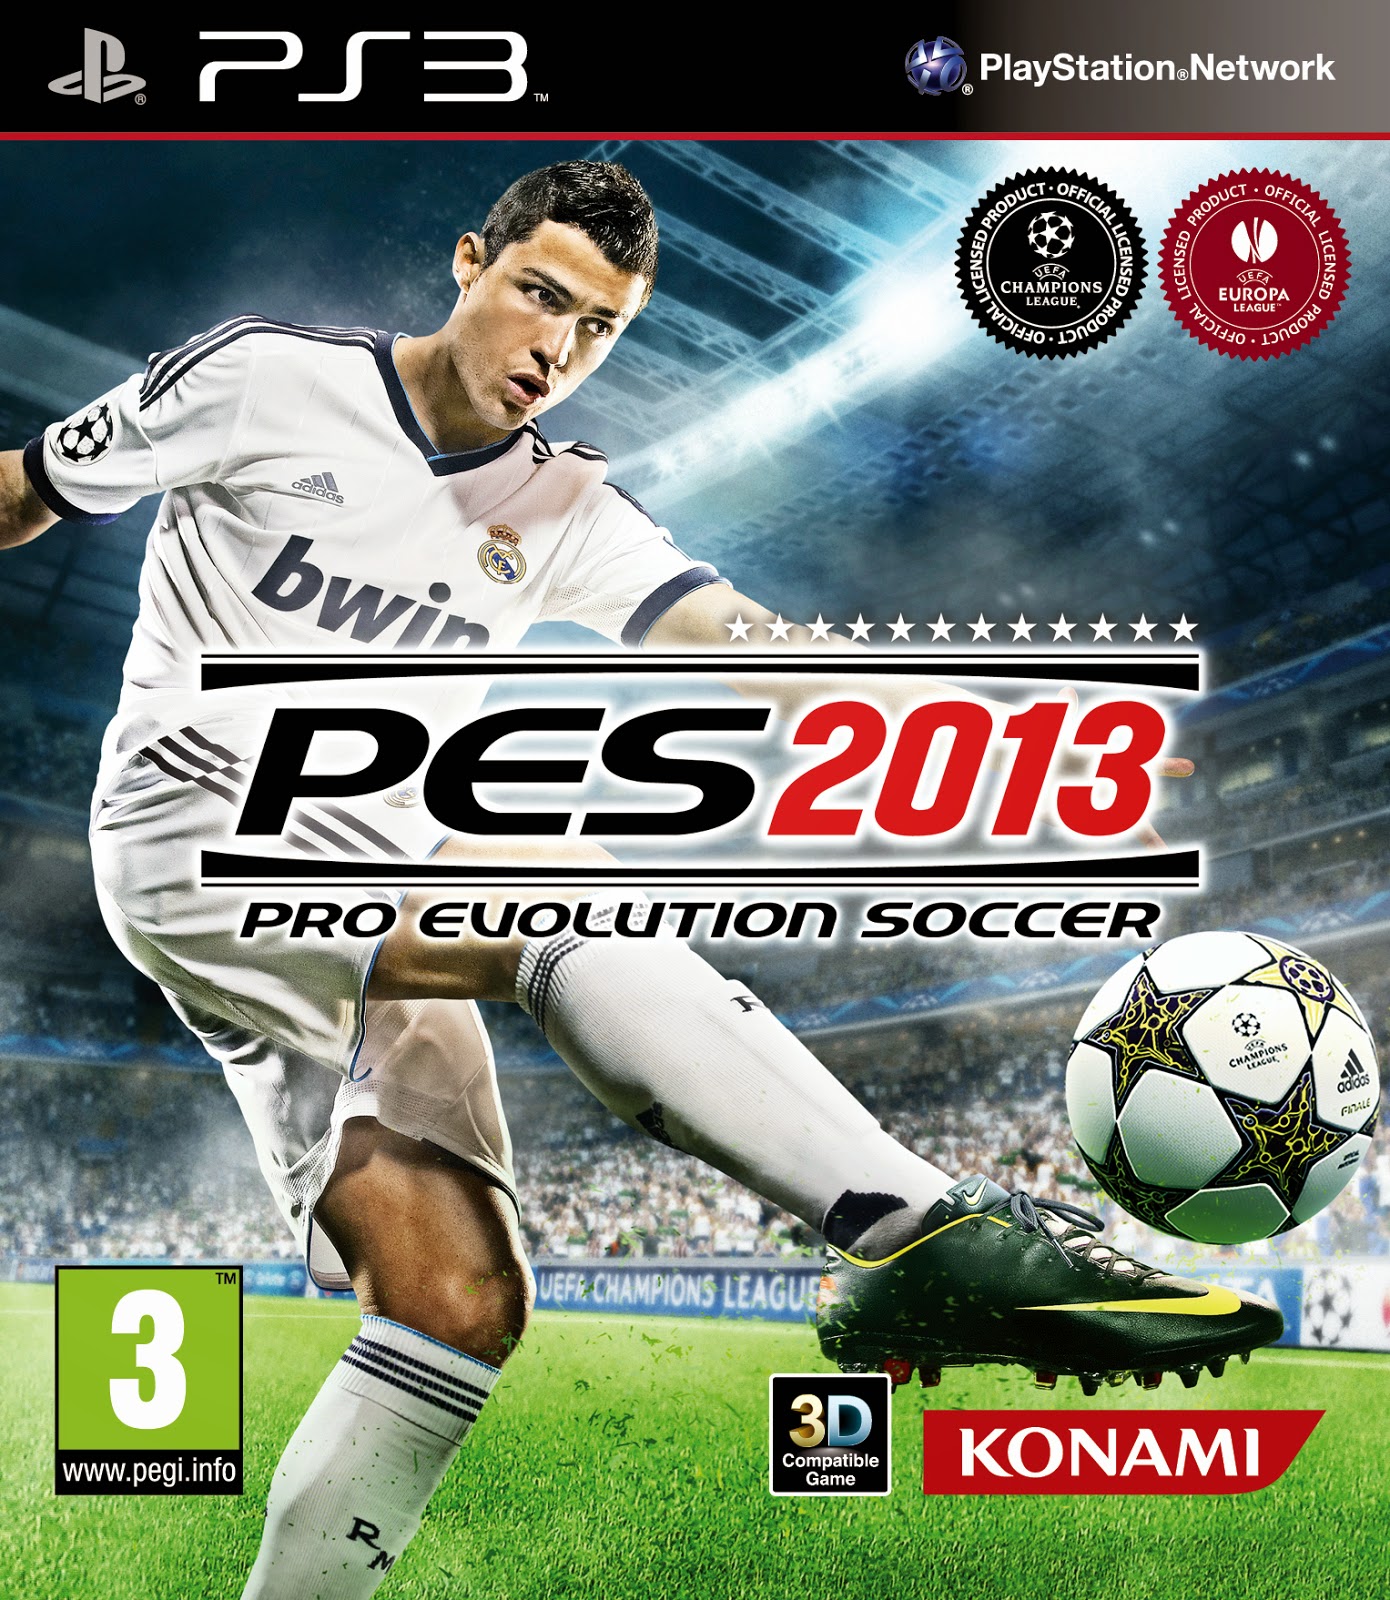 Download PES 2013 full version + patch for PC free